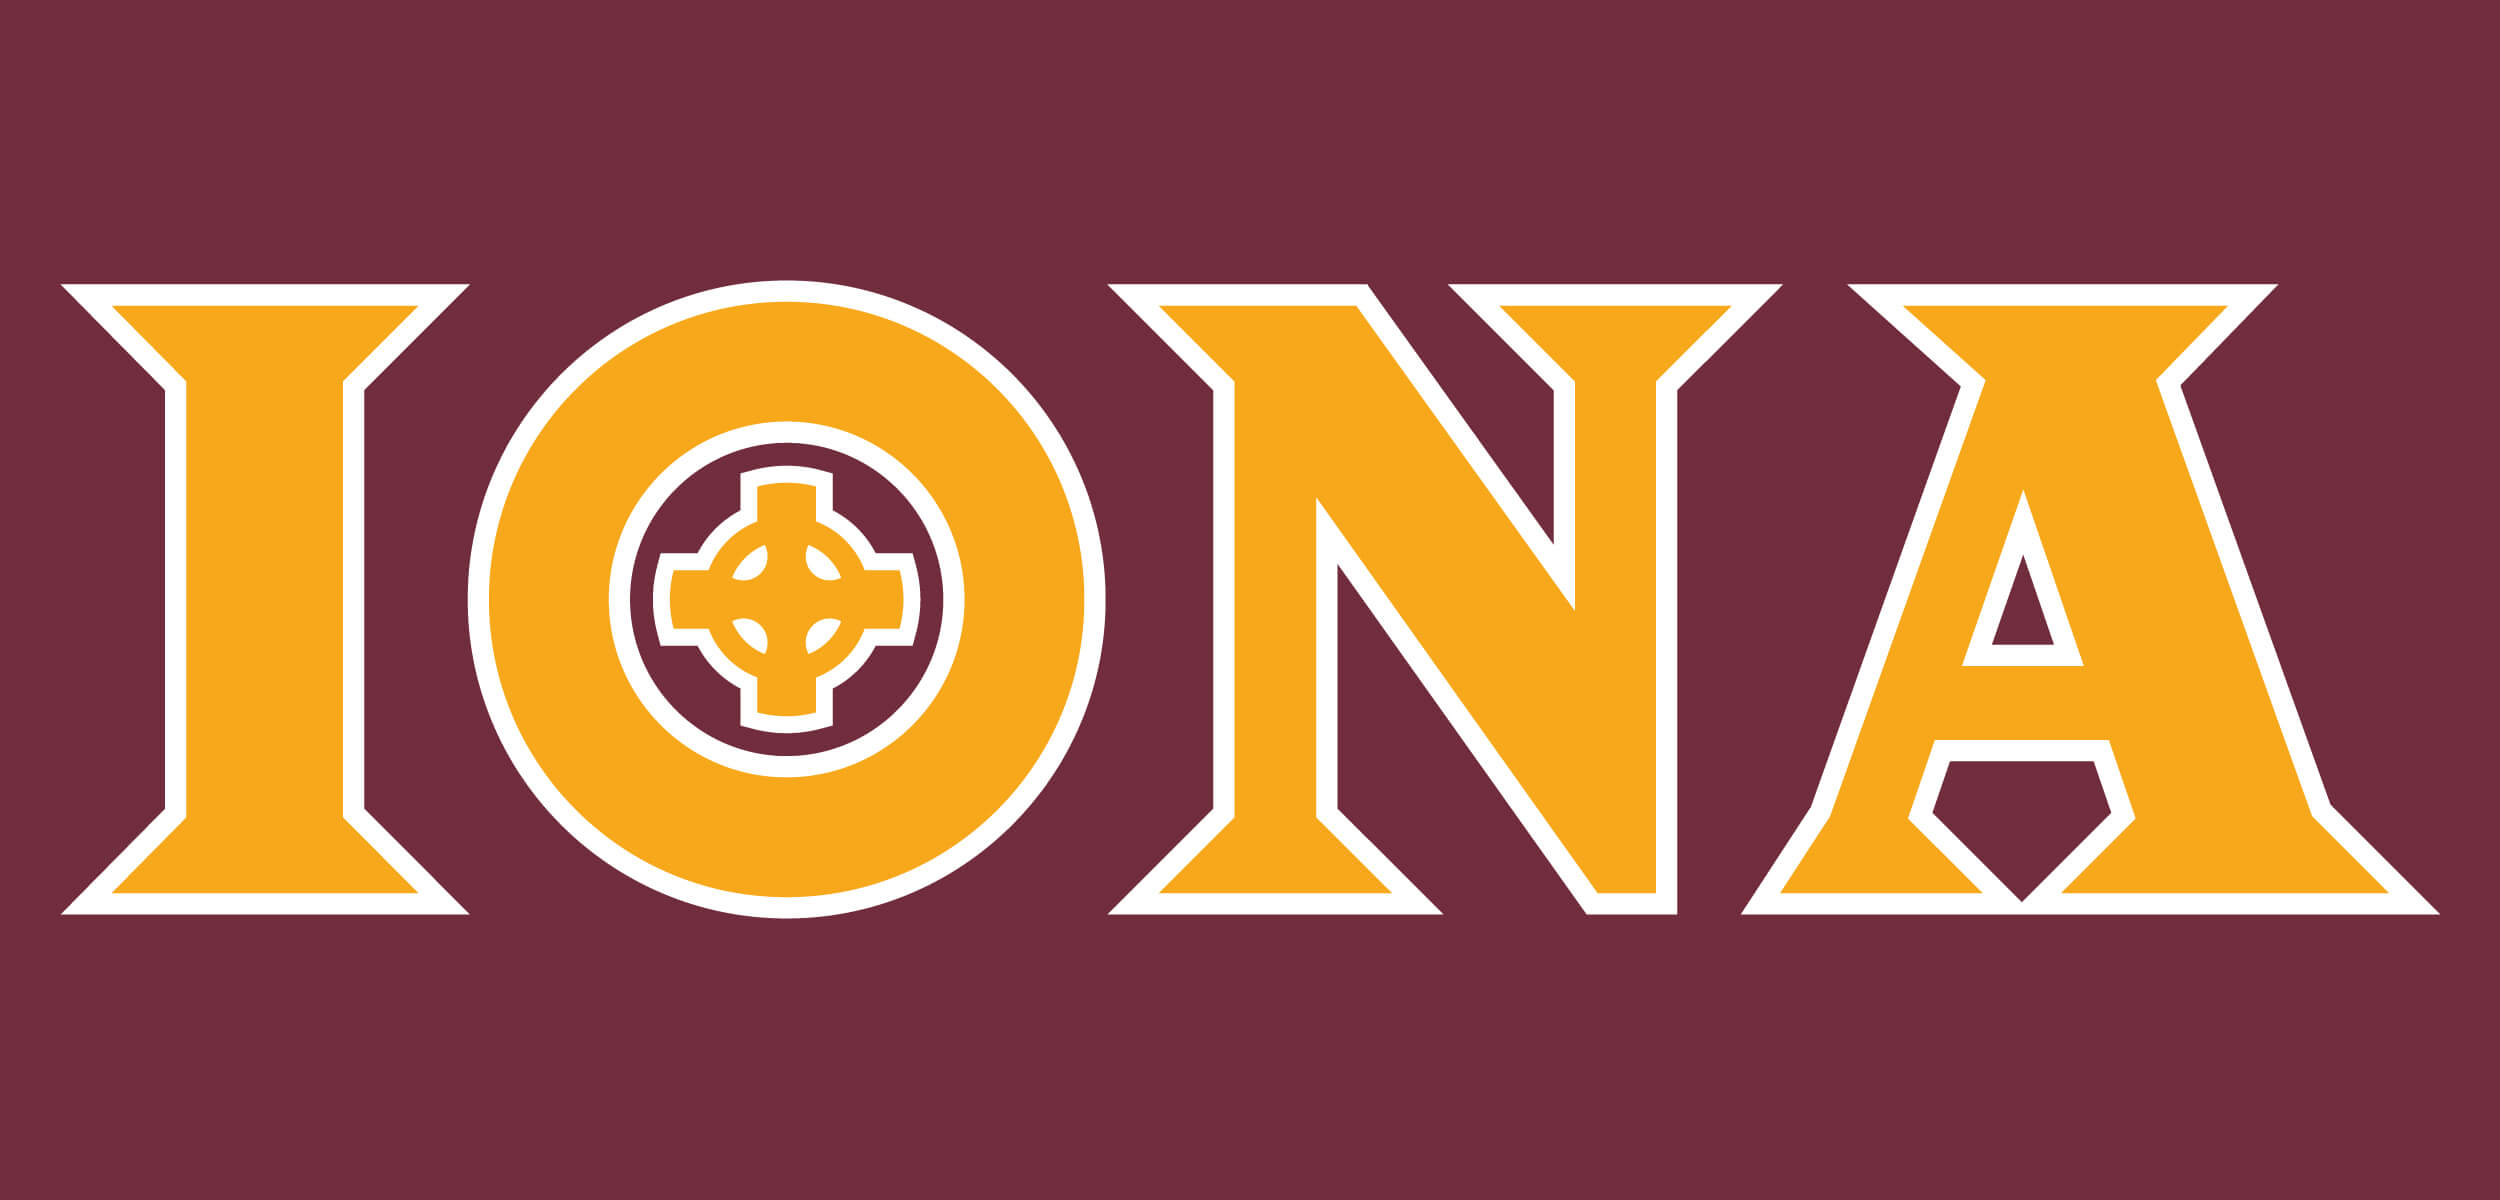 Iona College SVGs PNGs DXFs ESPSs Logo Pack Bundle lupon.gov.ph